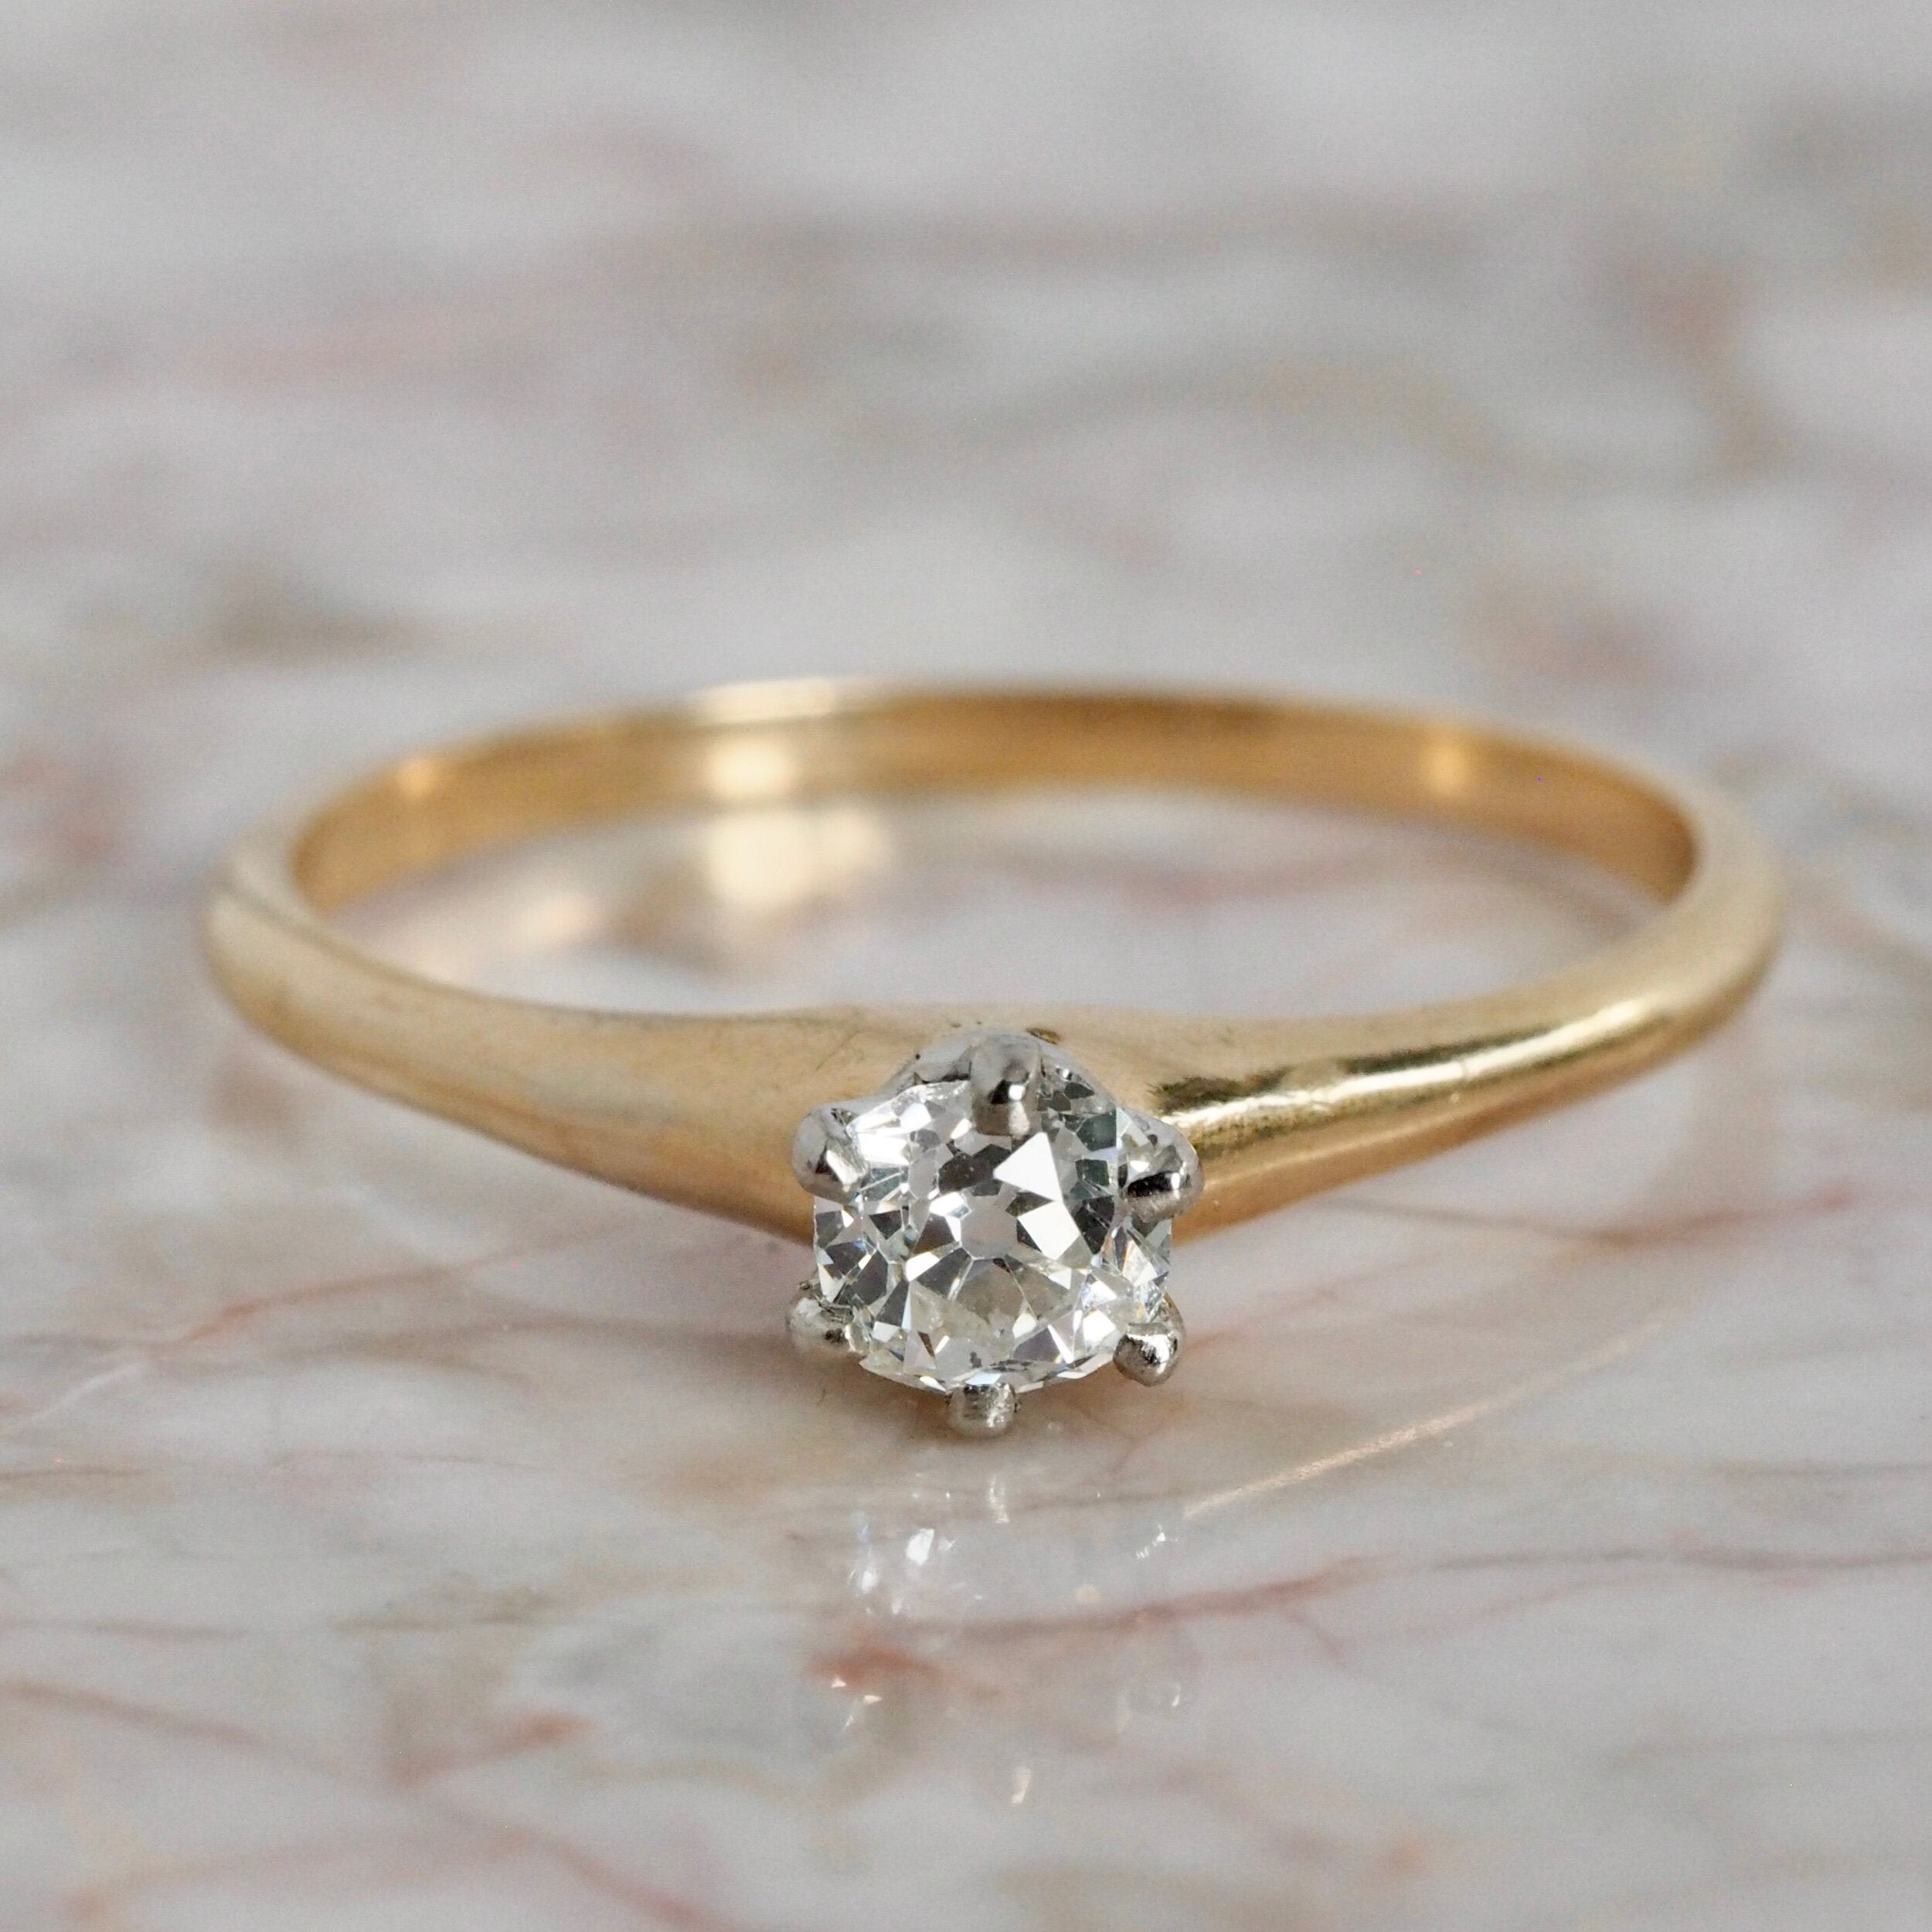 Antique 14k Gold Old Mine Cut Diamond Solitaire Ring